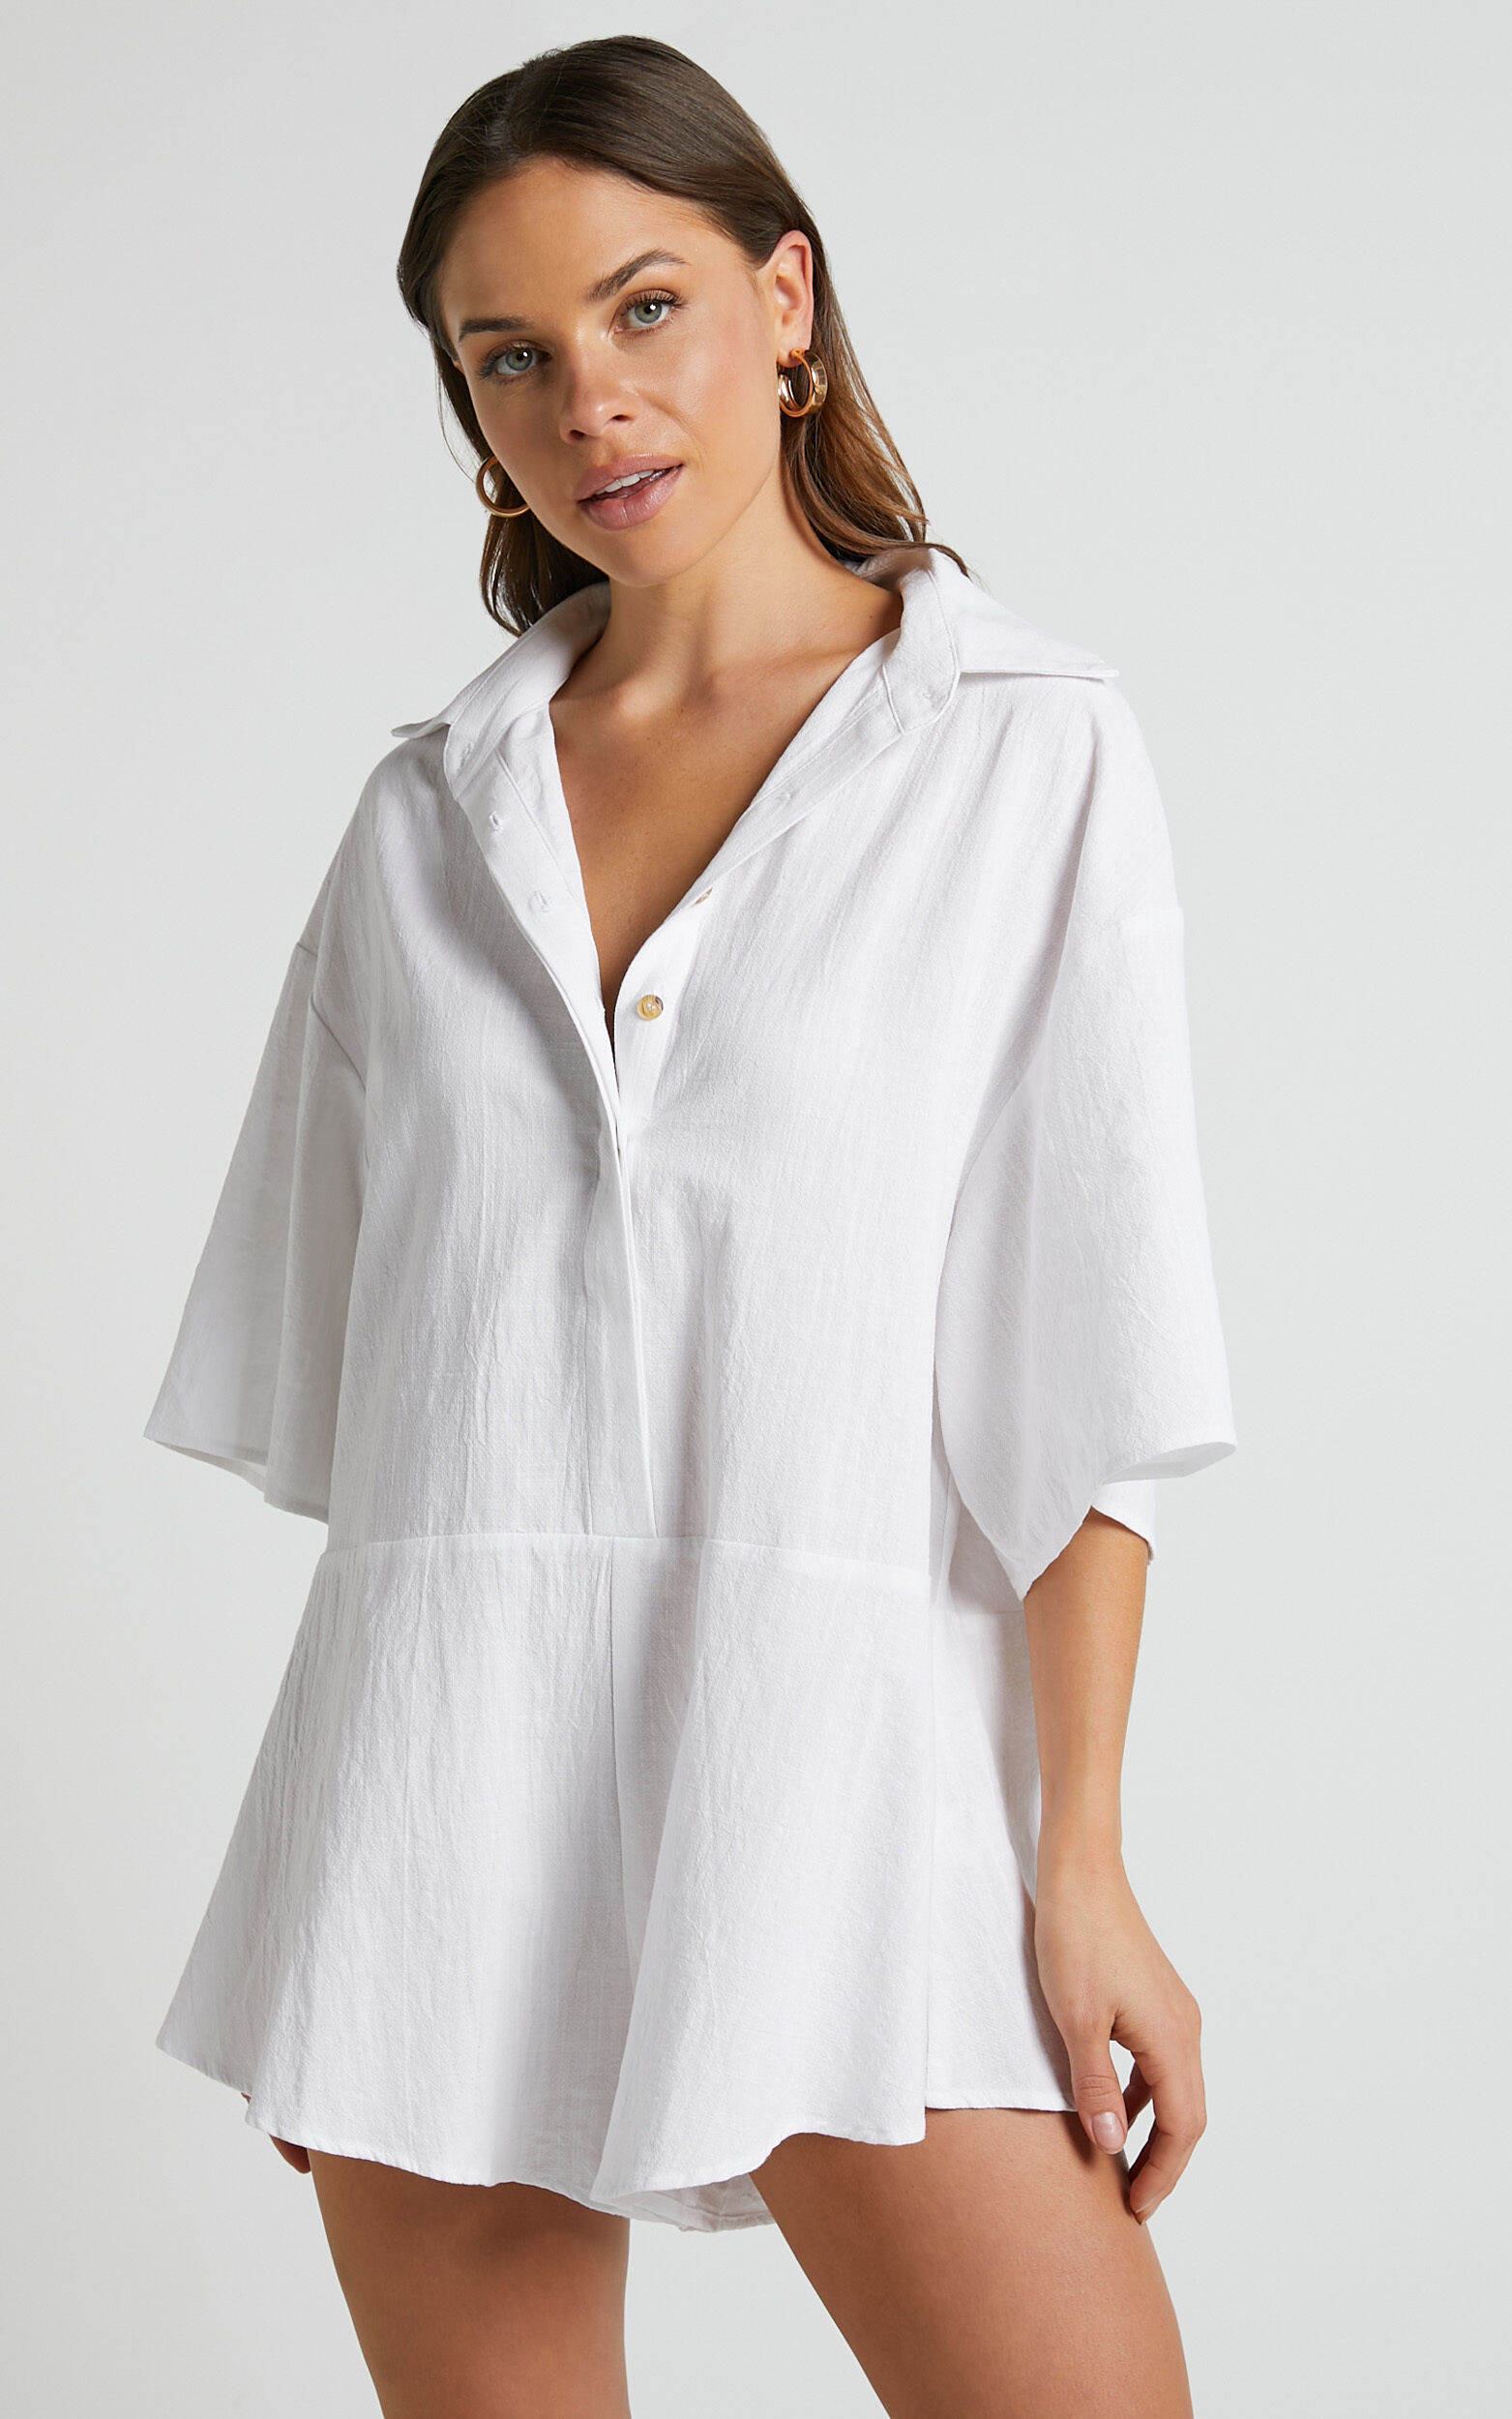 Ankana Playsuit - Short Sleeve Relaxed Button Front Playsuit in White - 06, WHT1